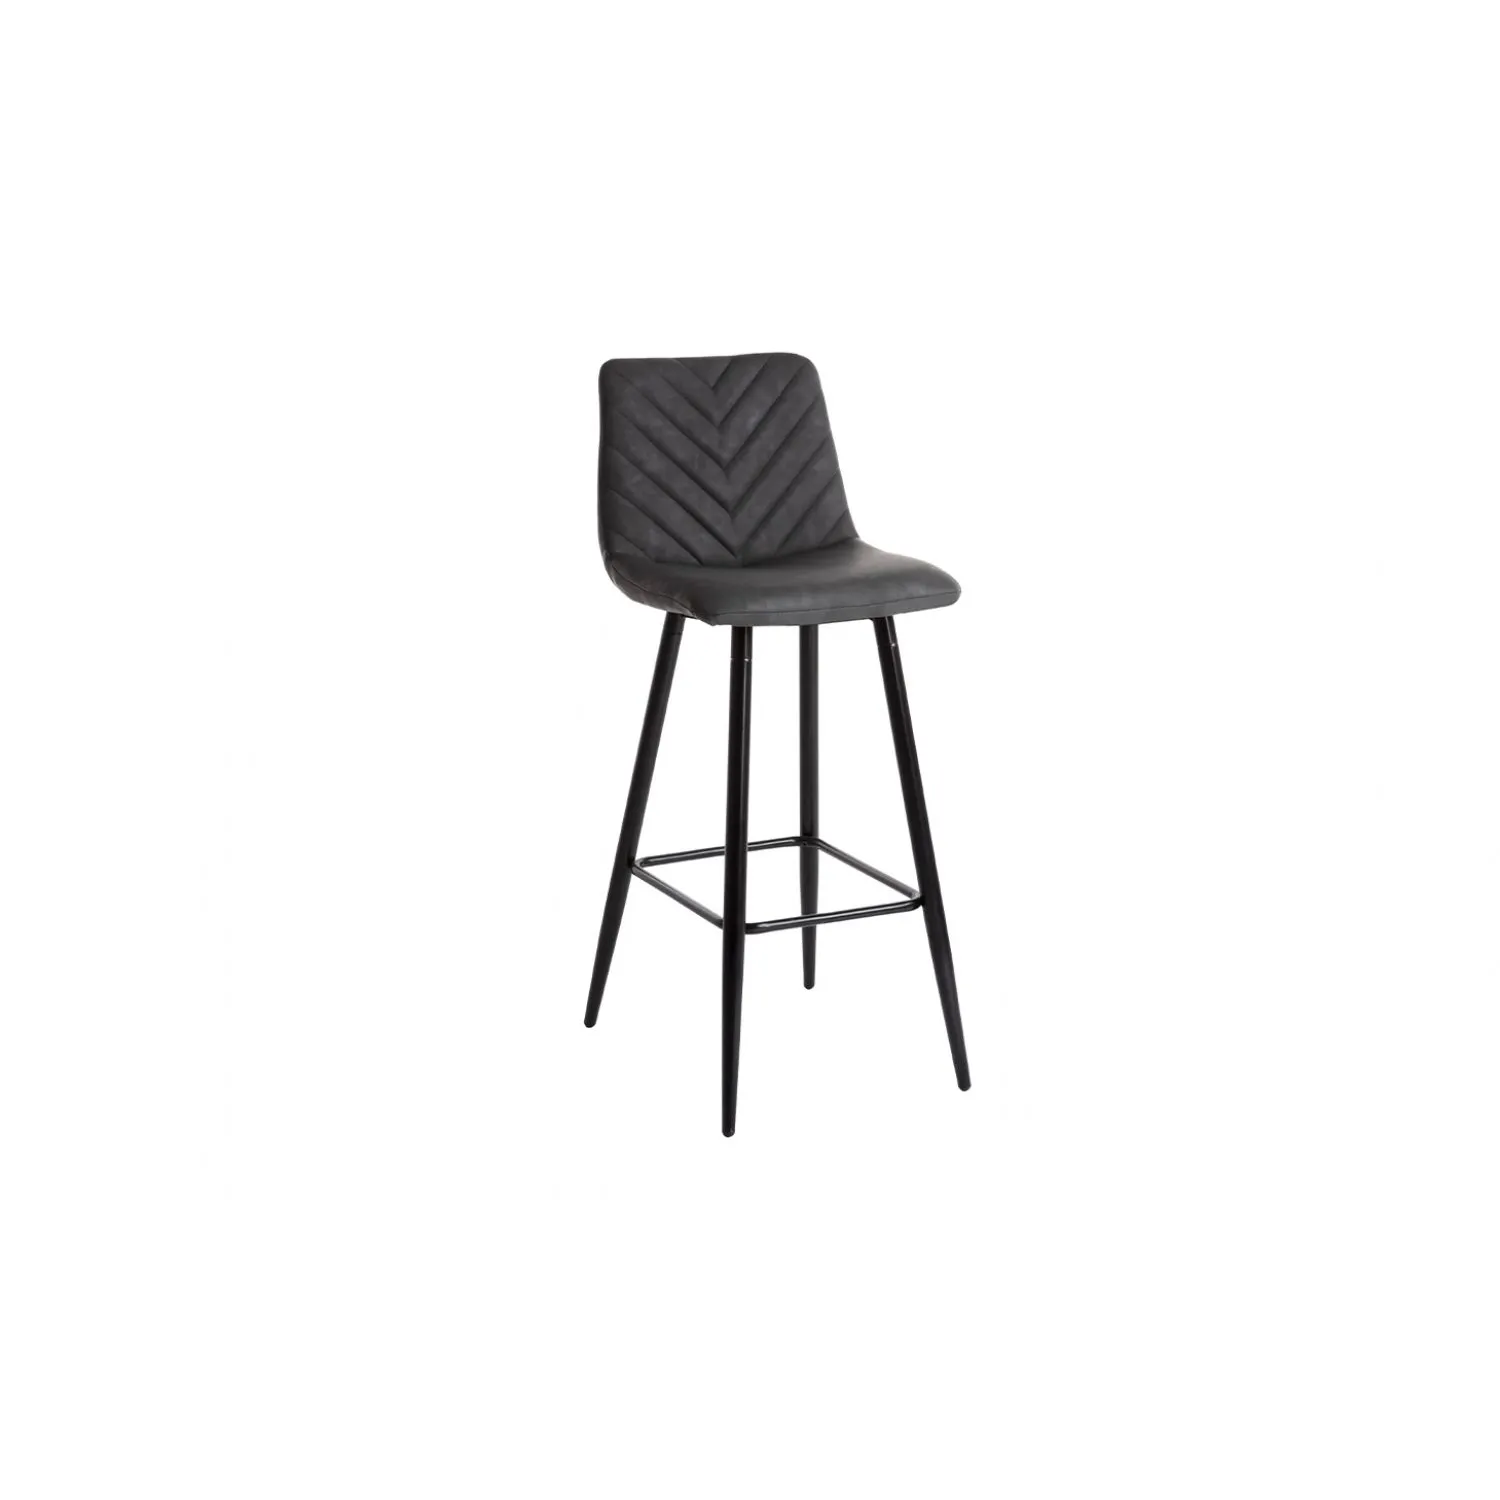 Industrial Grey Faux Leather Kitchen Bar Stool Metal Frame